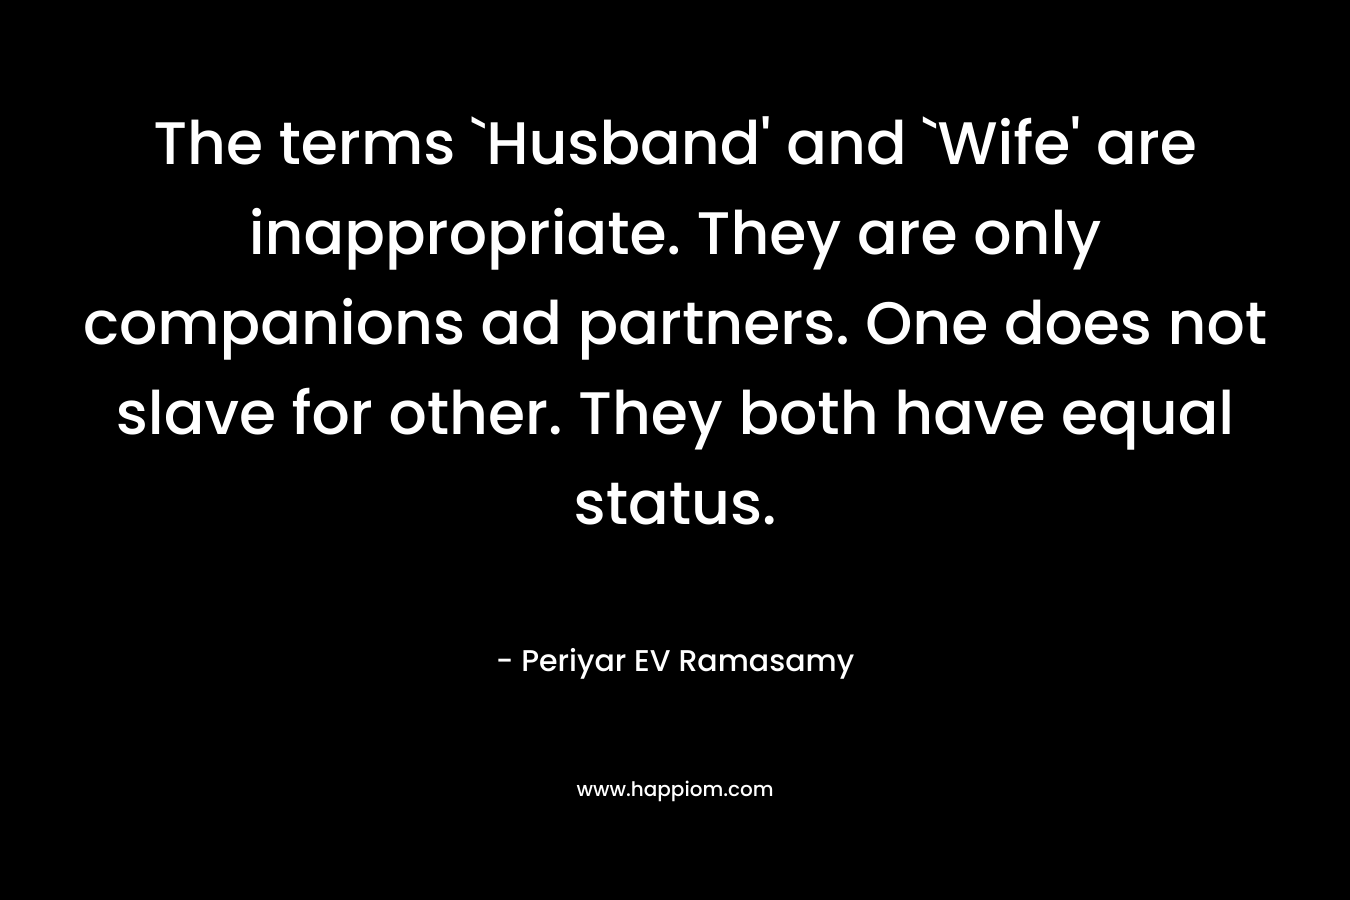 The terms `Husband’ and `Wife’ are inappropriate. They are only companions ad partners. One does not slave for other. They both have equal status. – Periyar EV Ramasamy